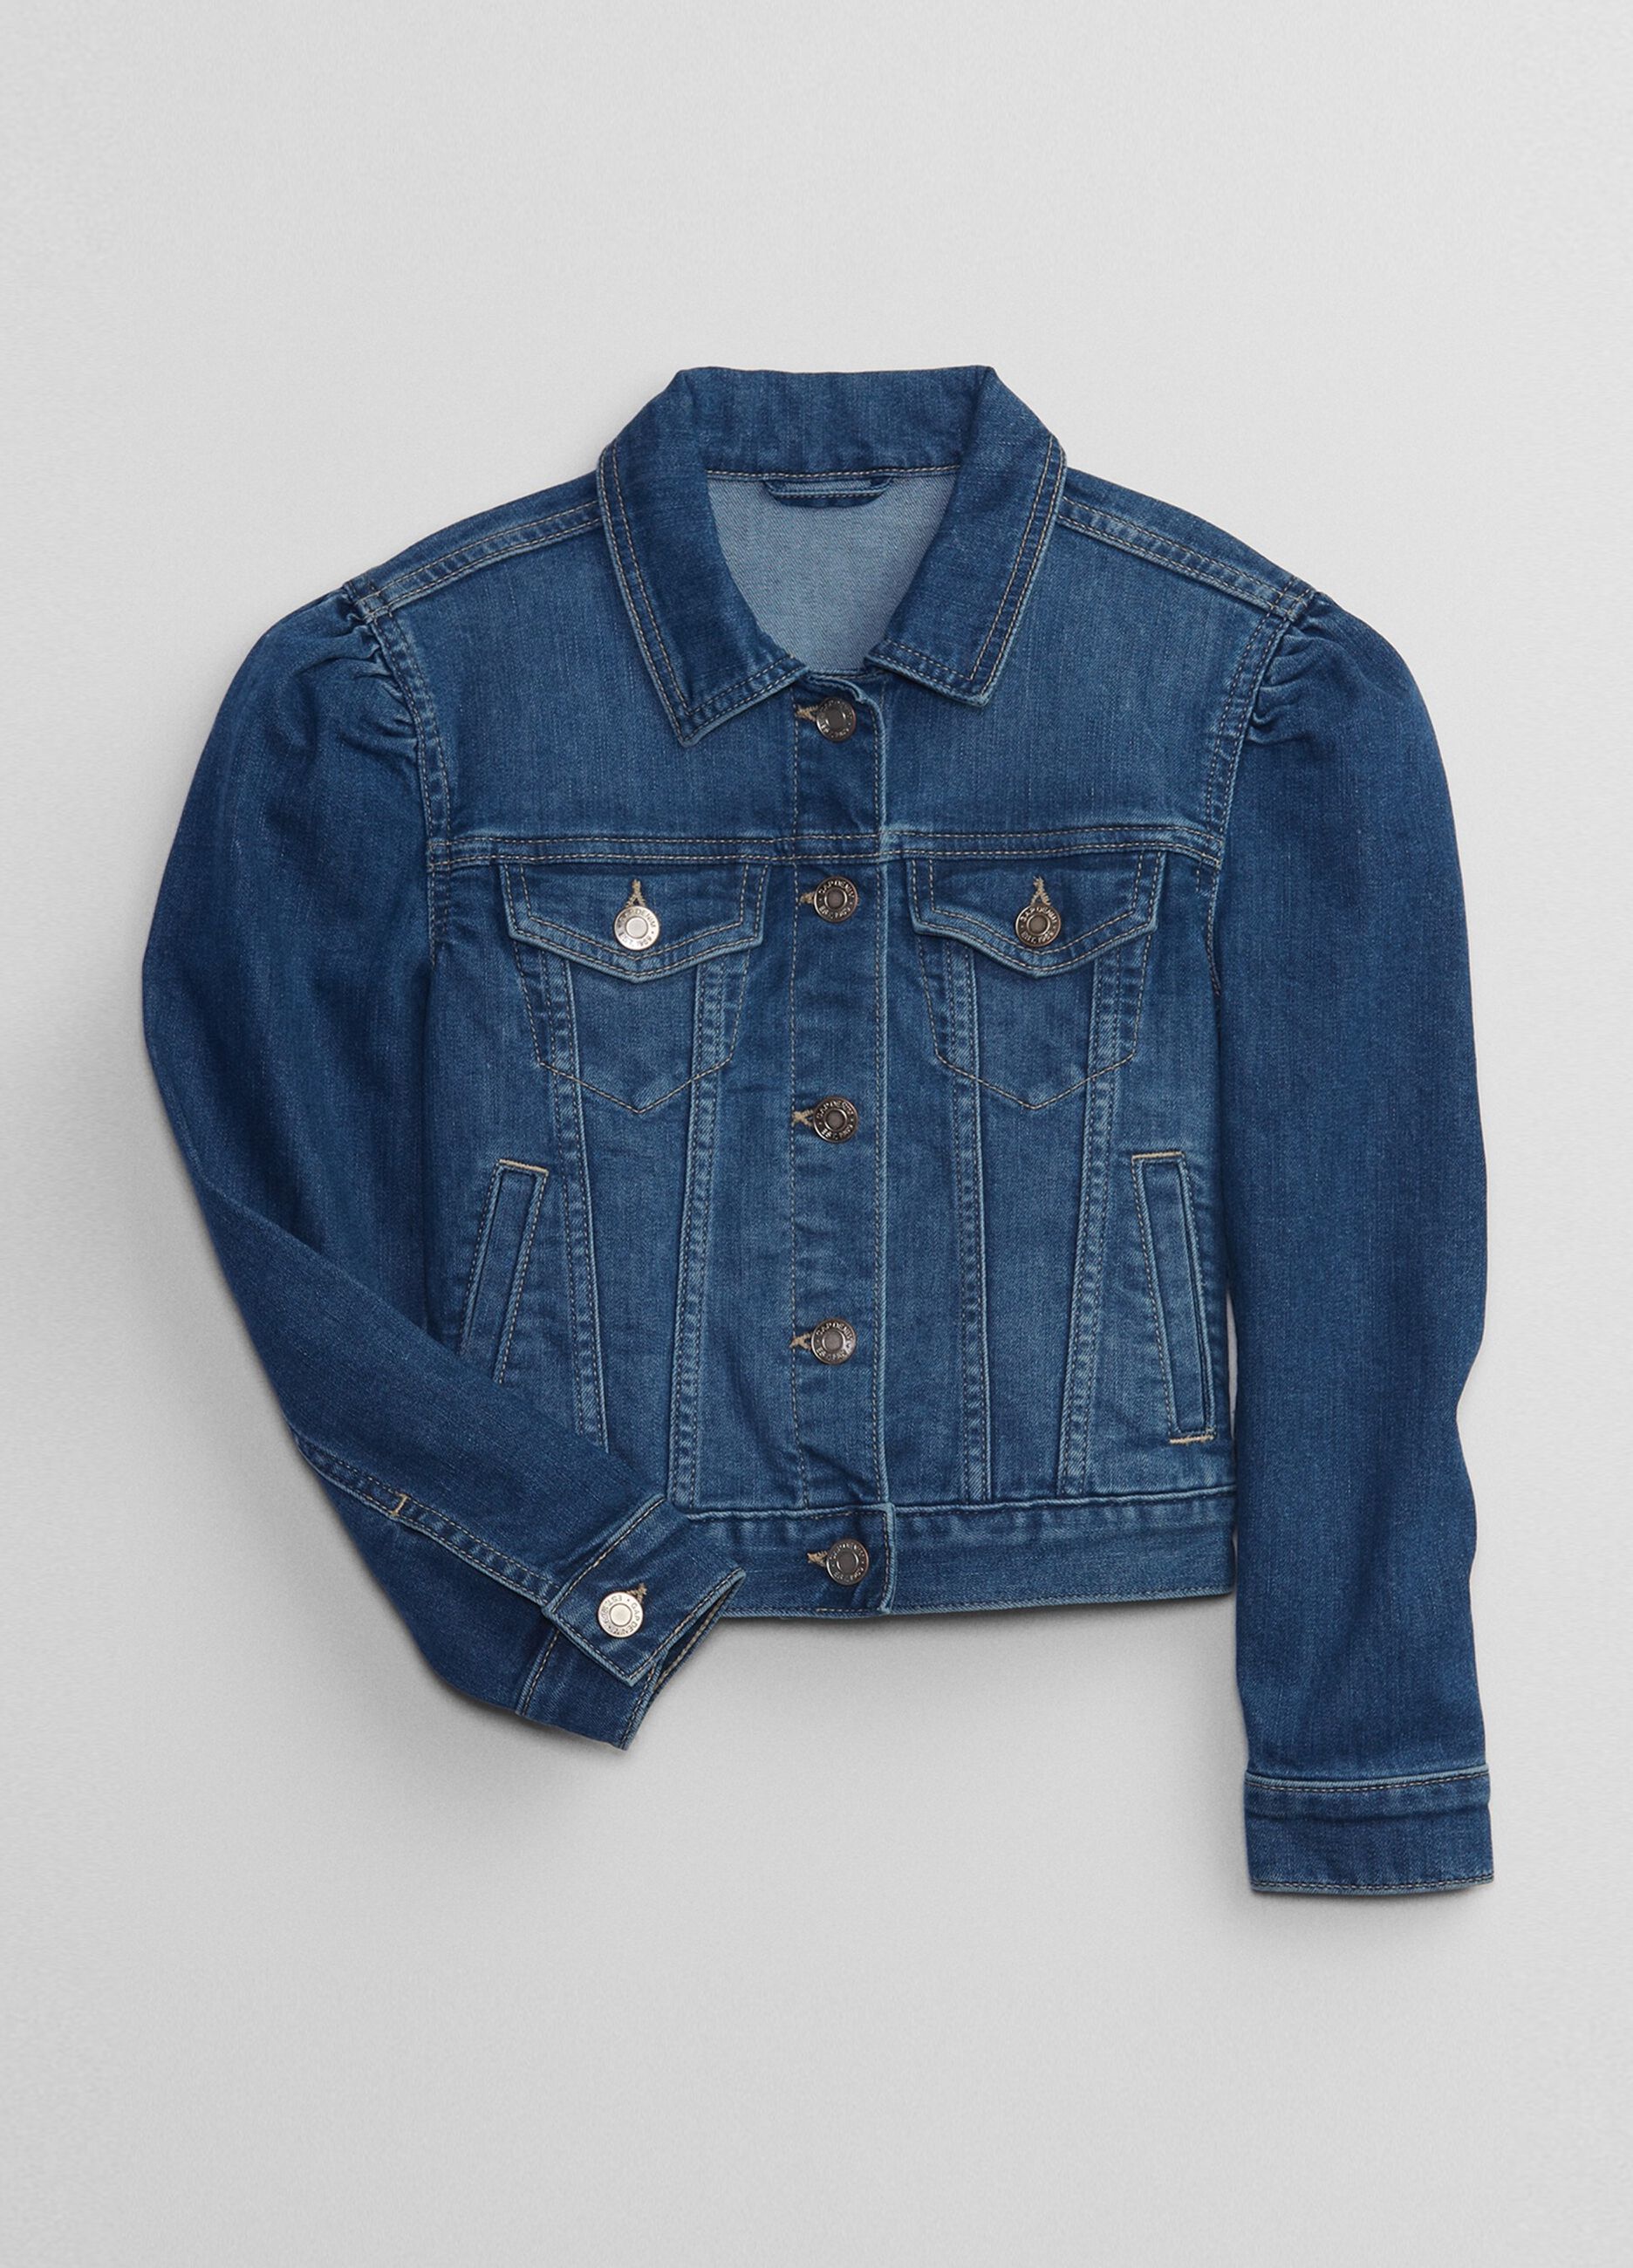 Short jacket in denim with puff sleeves